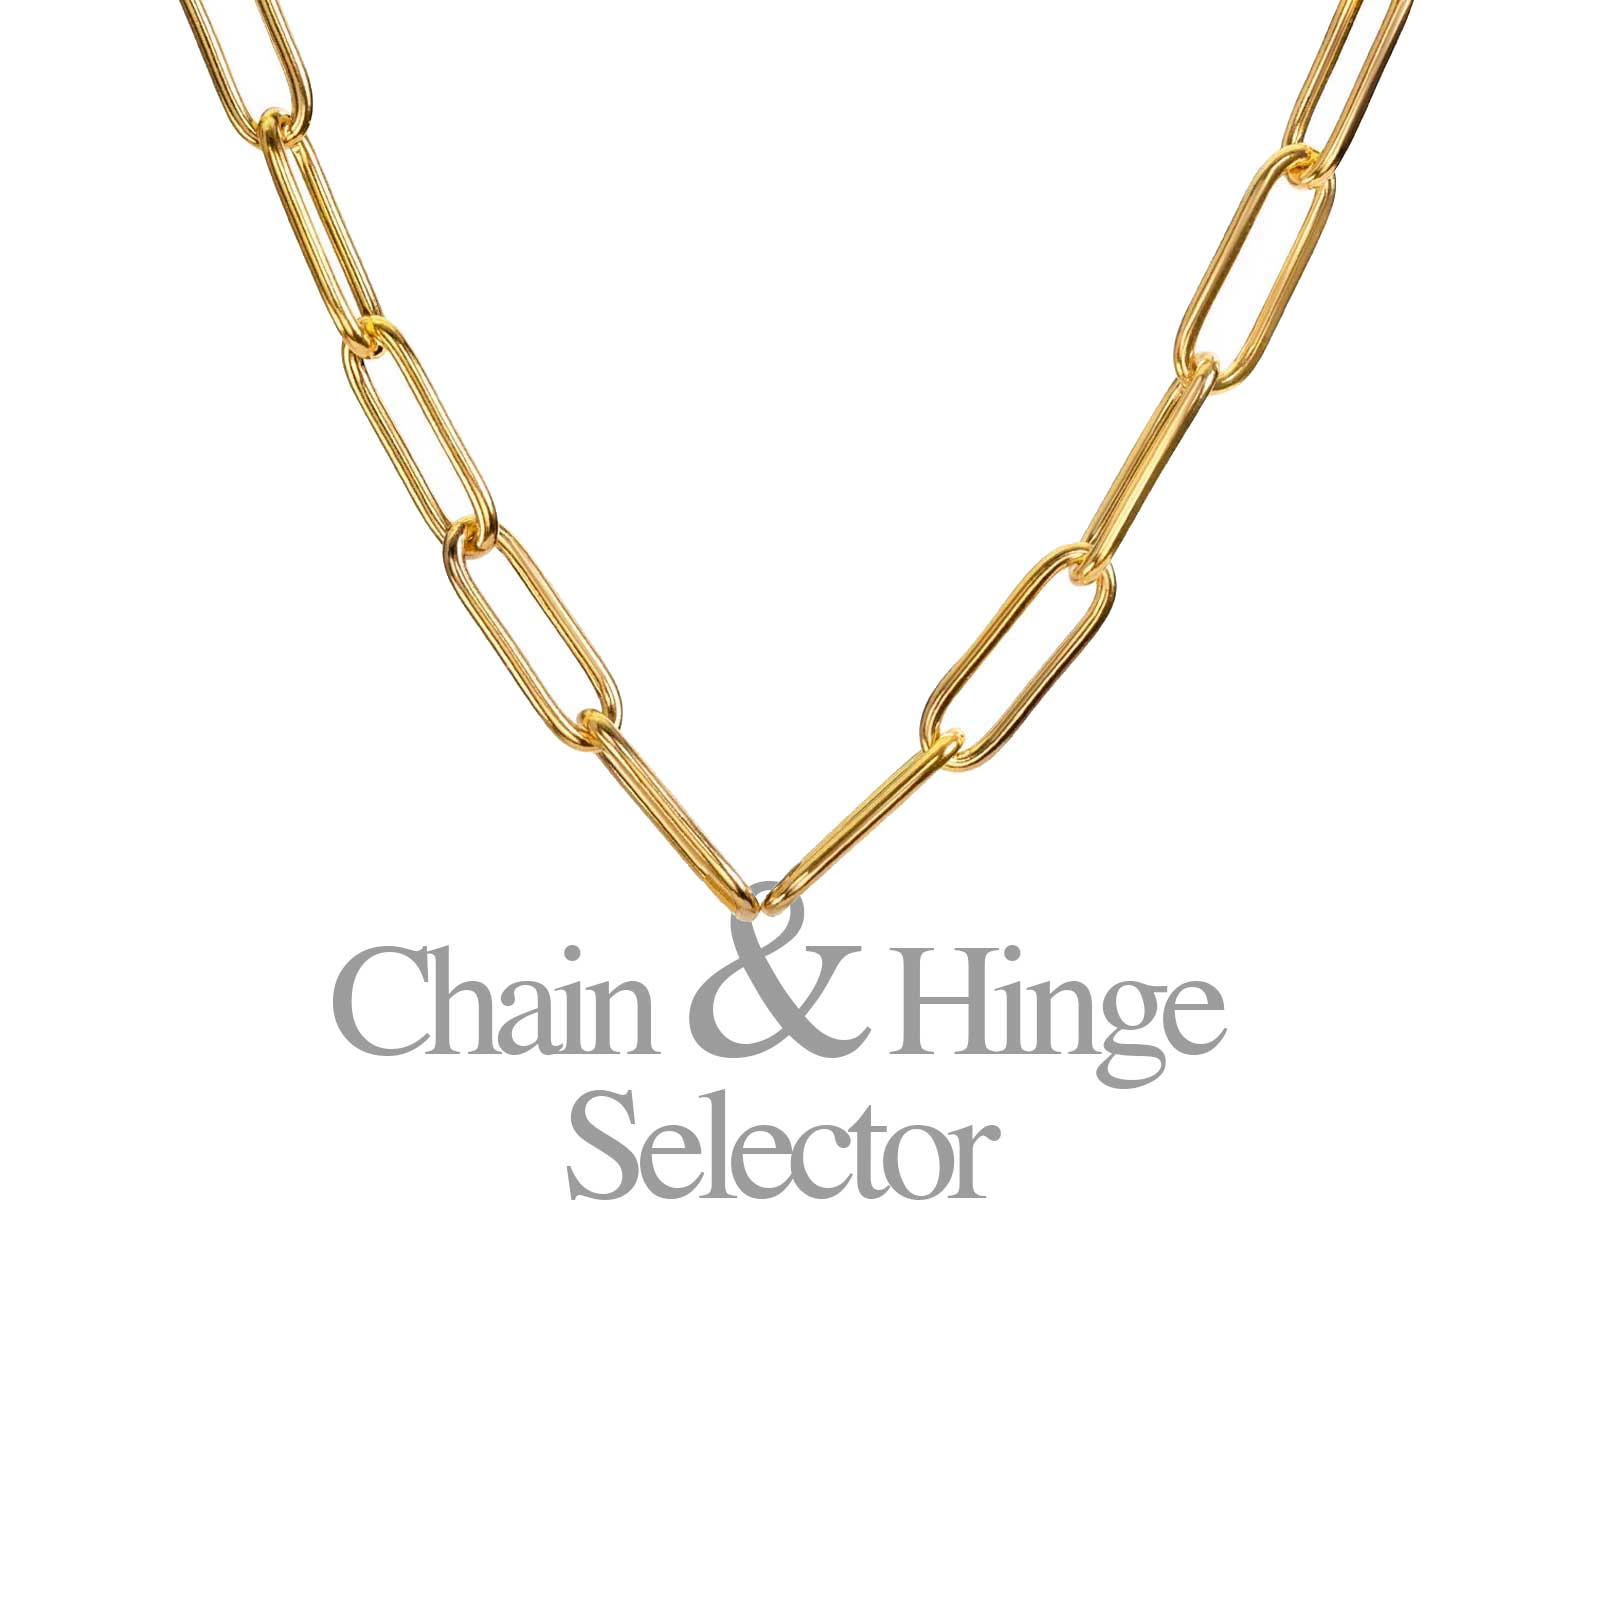 HEATHER B. MOORE 5.2mm Solid 14k Gold Link Chain and Hinge